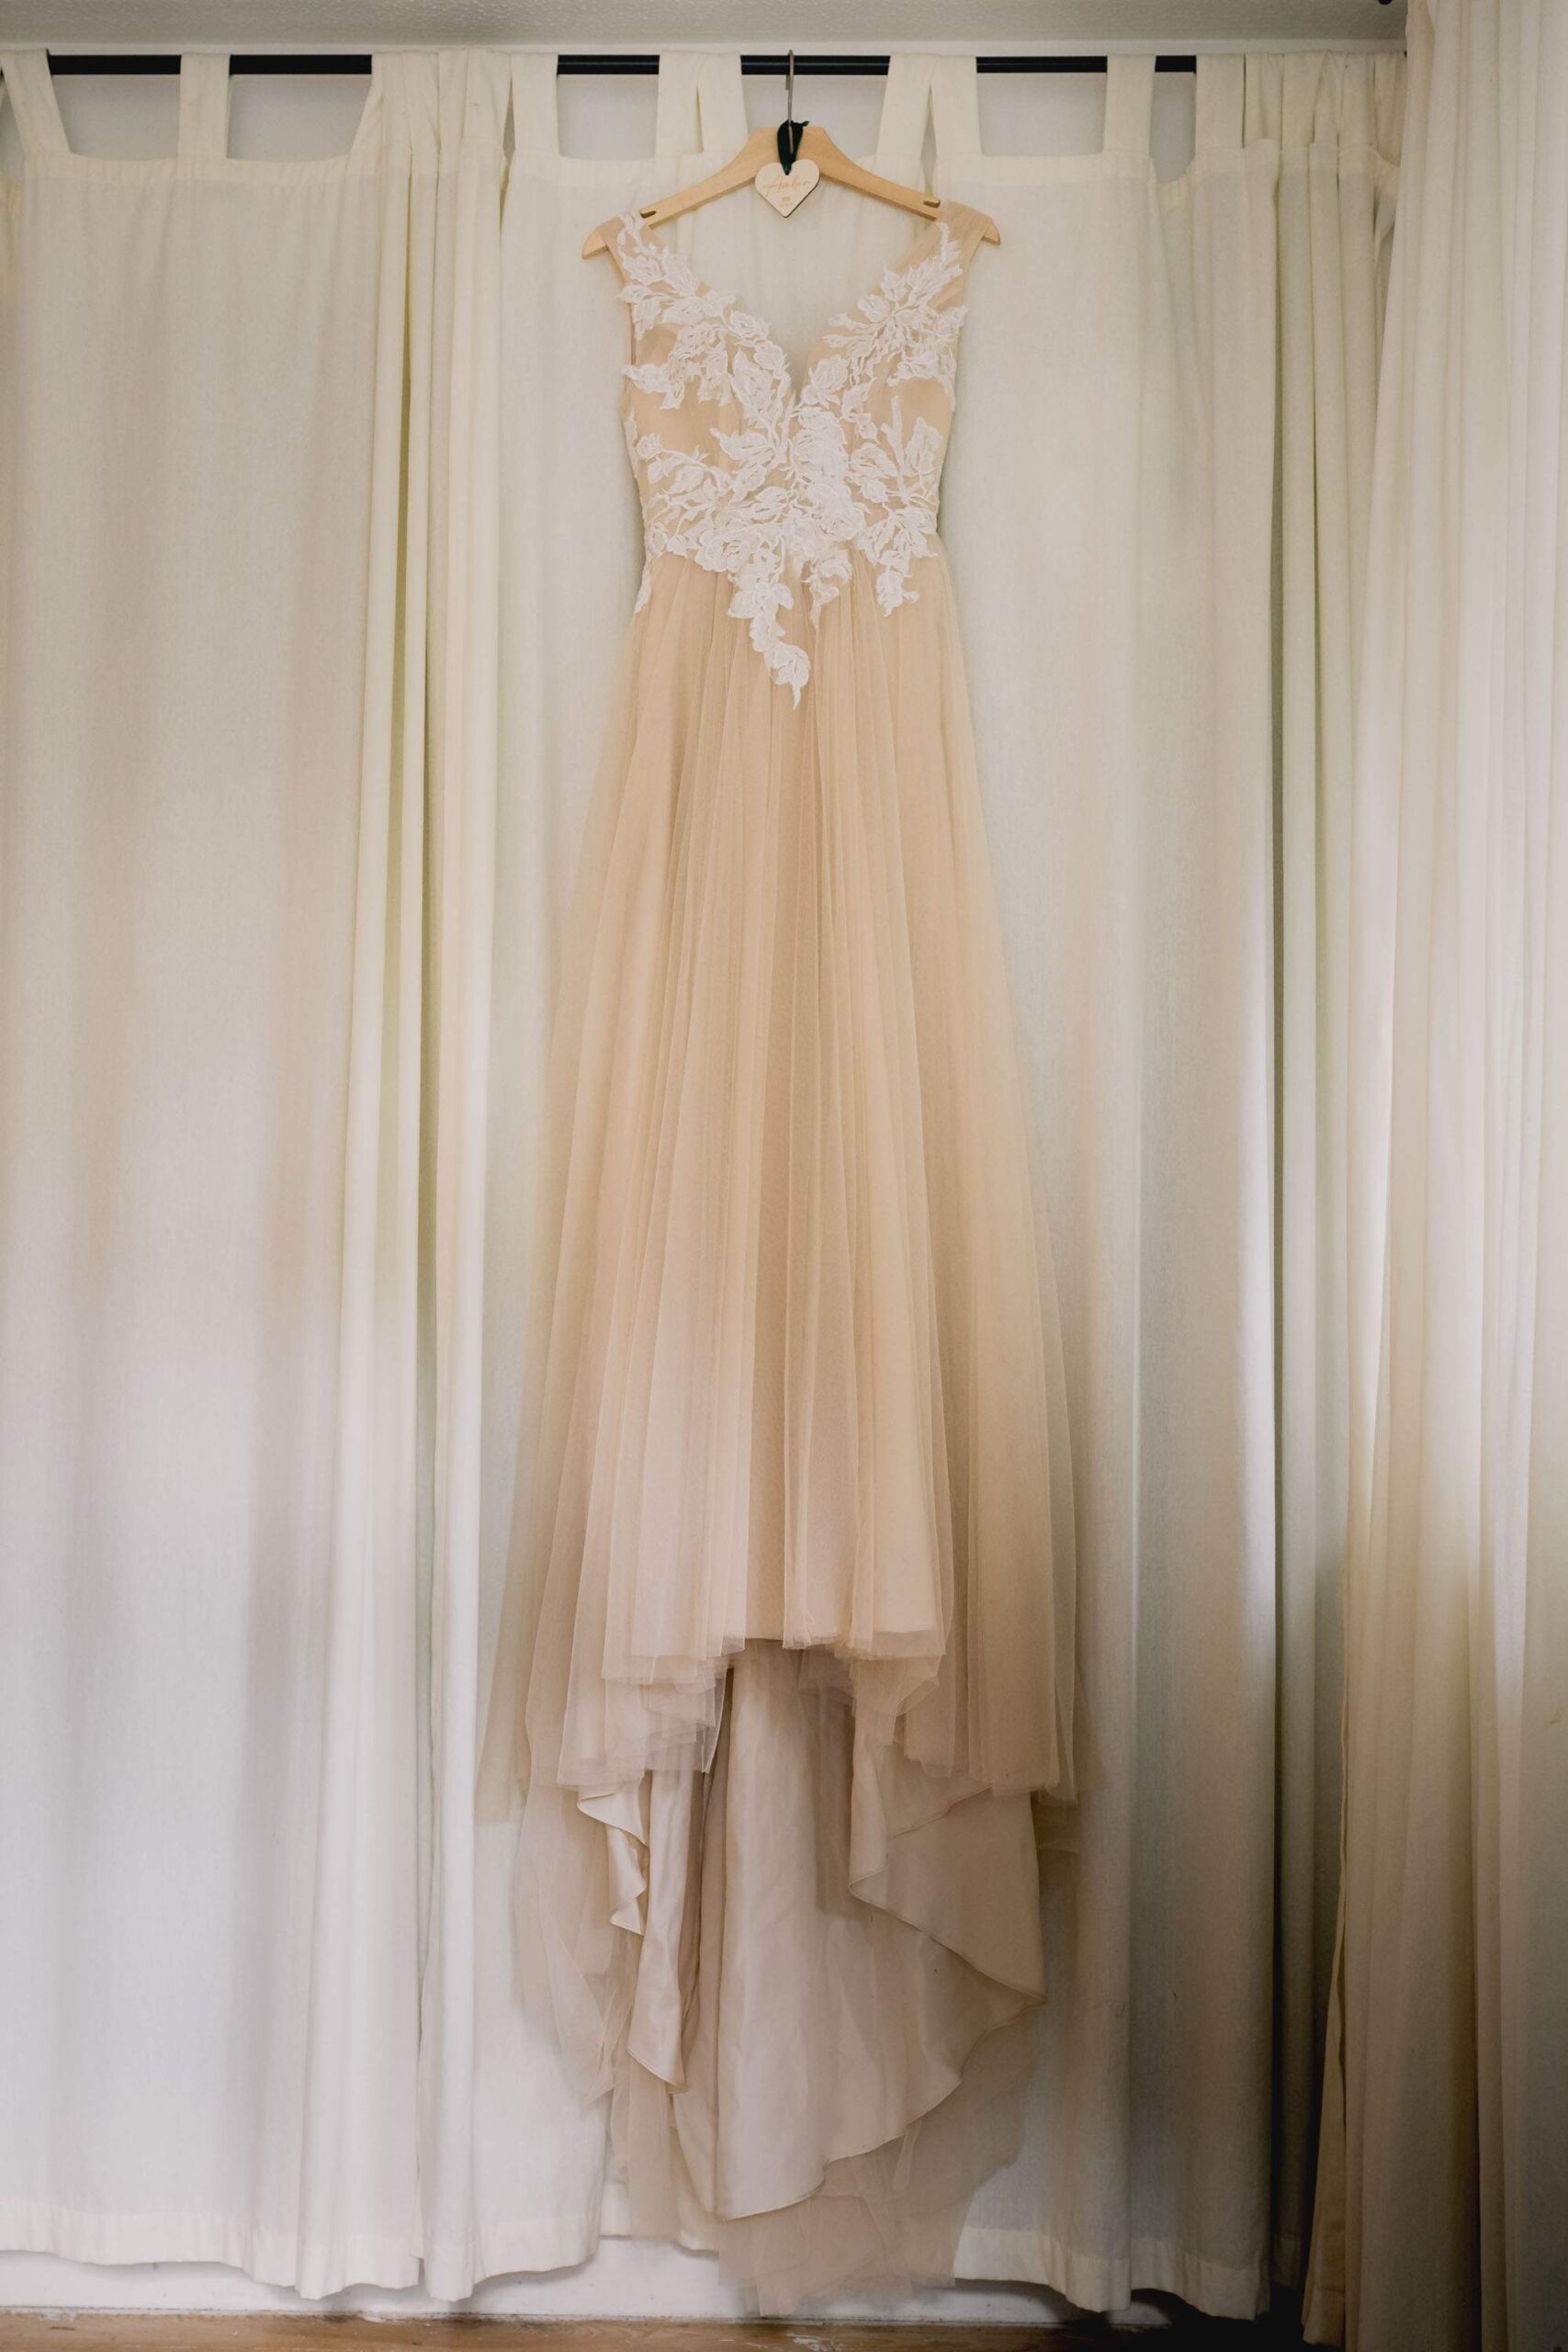 Bride's wedding dress that she will wear at her wedding ceremony at Eastbourne Town Hall.